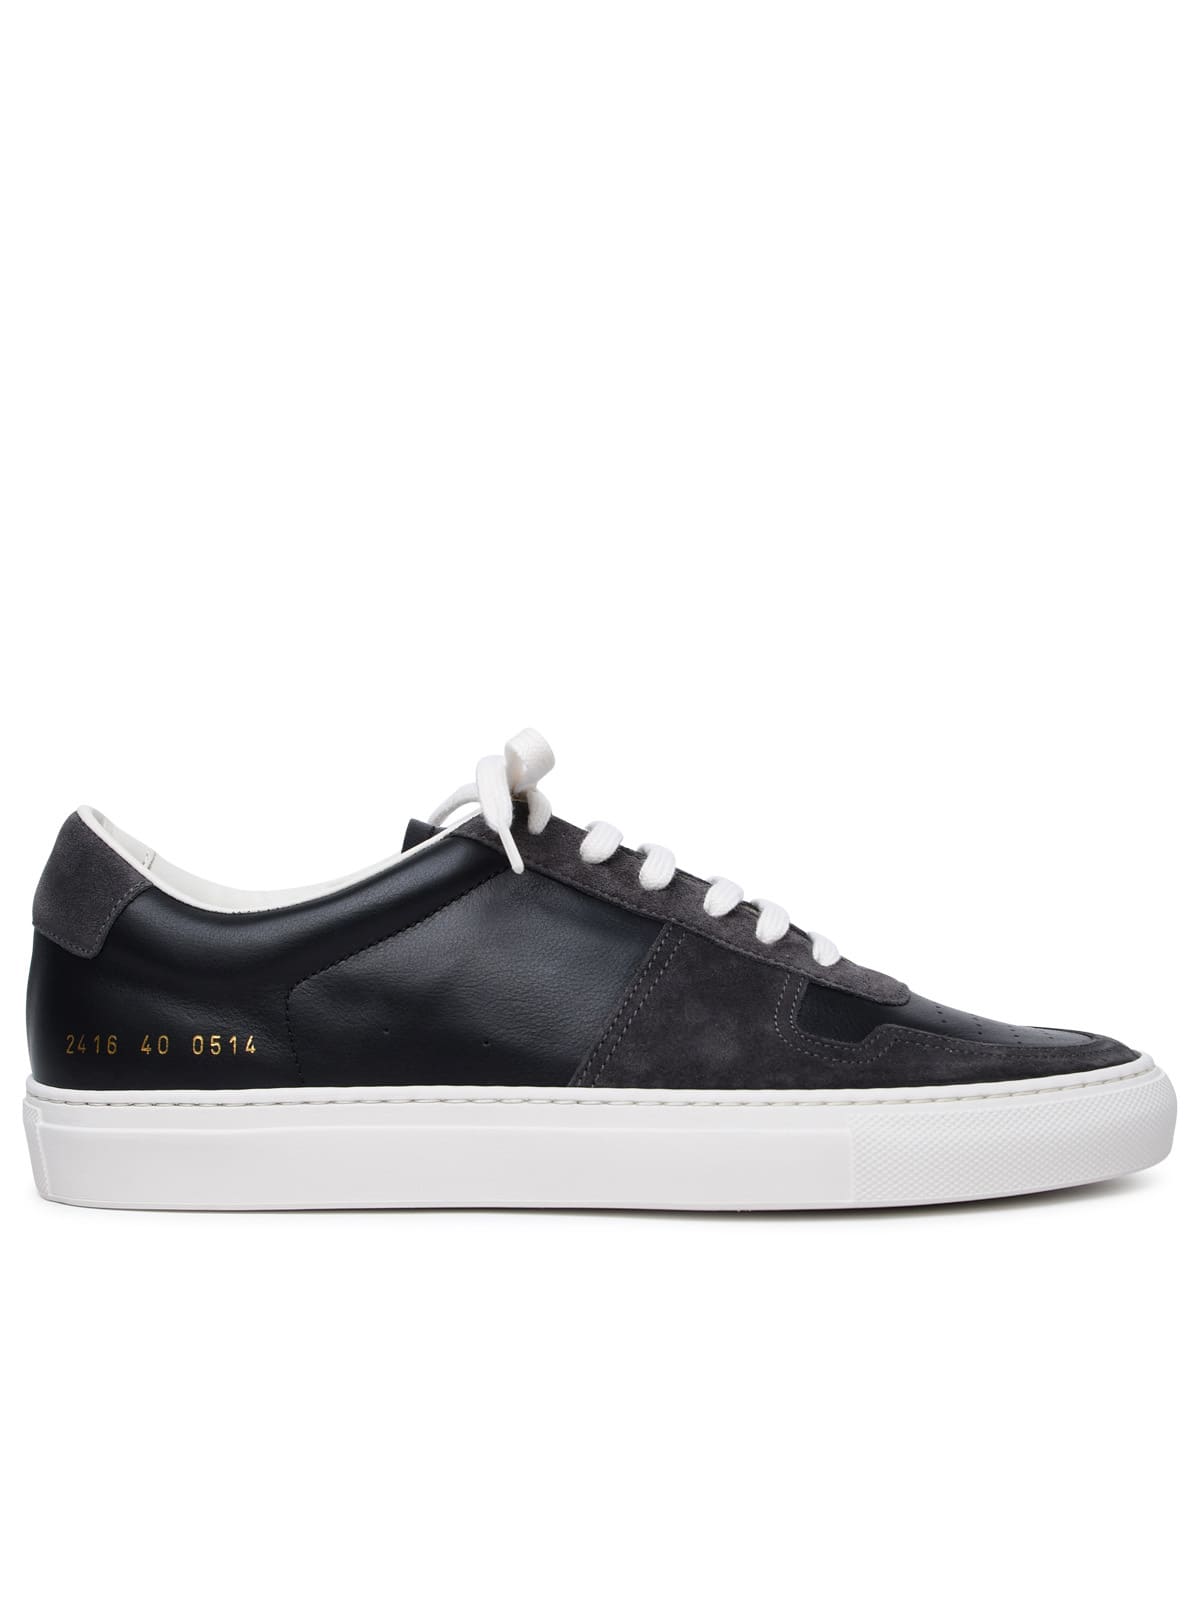 Common Projects Bball Duo Sneakers